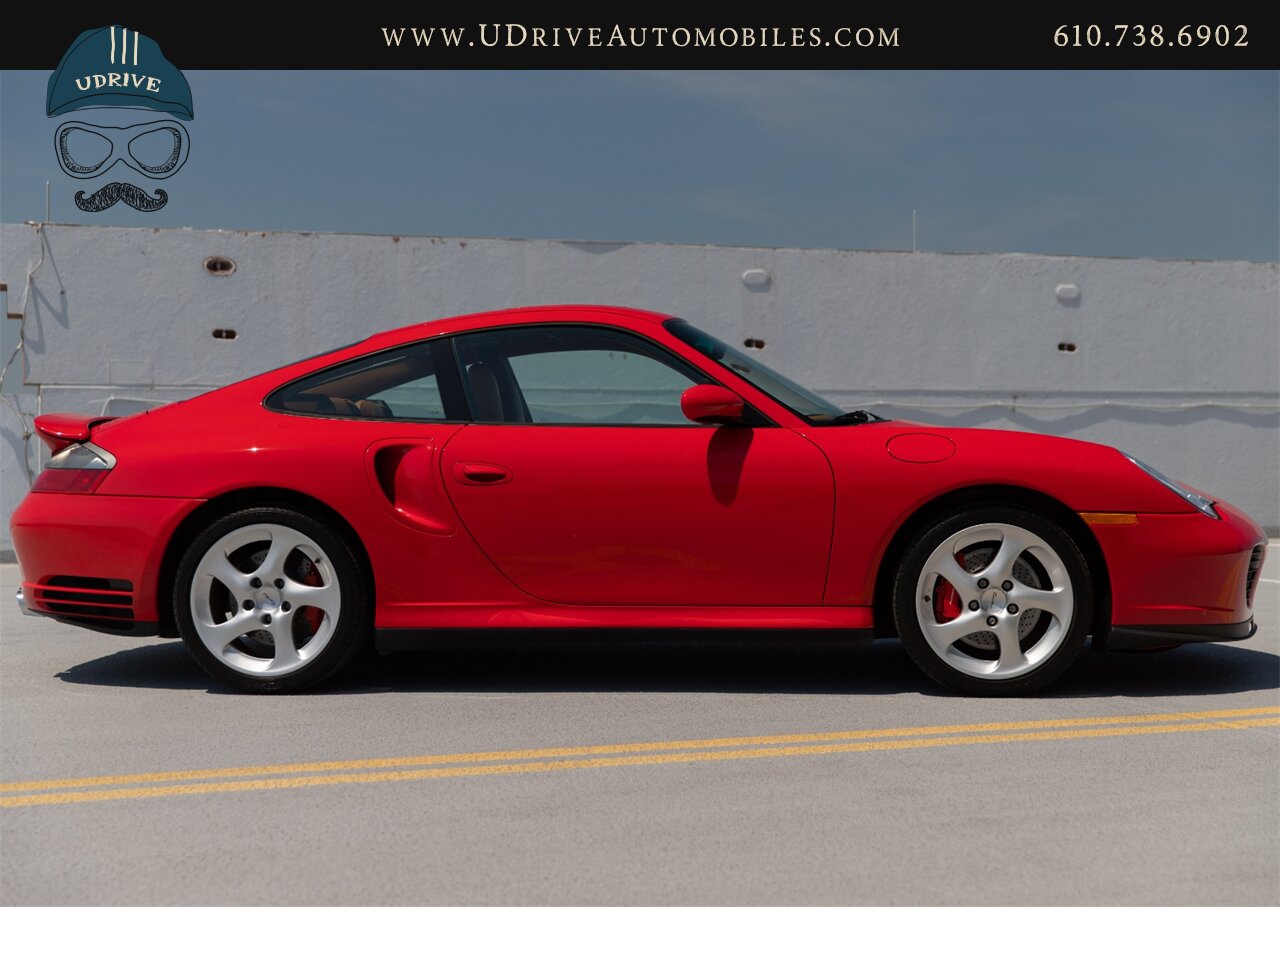 2003 Porsche 911 Turbo 996 Turbo X50 Power Kit 6 Speed Manual  Rare Color Guards Red over Brown Natural Leather - Photo 18 - West Chester, PA 19382